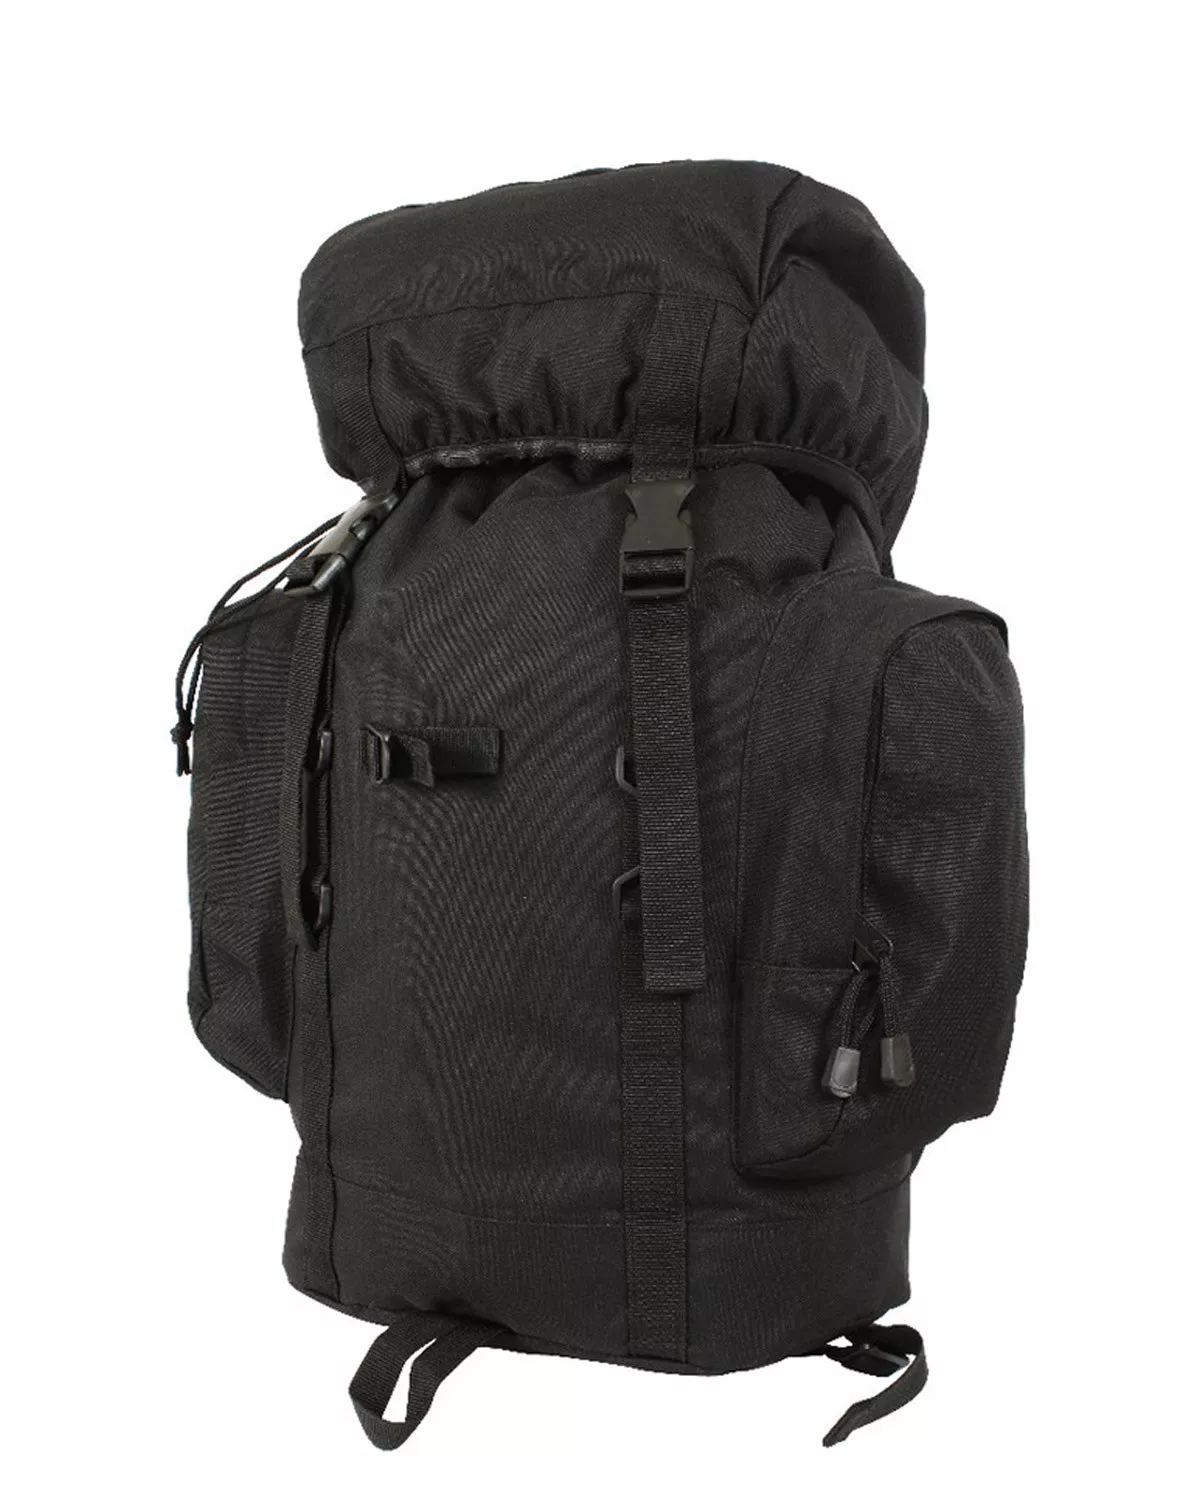 #3 - Rothco Tactical Backpack - 25 Liter (Sort, One Size)